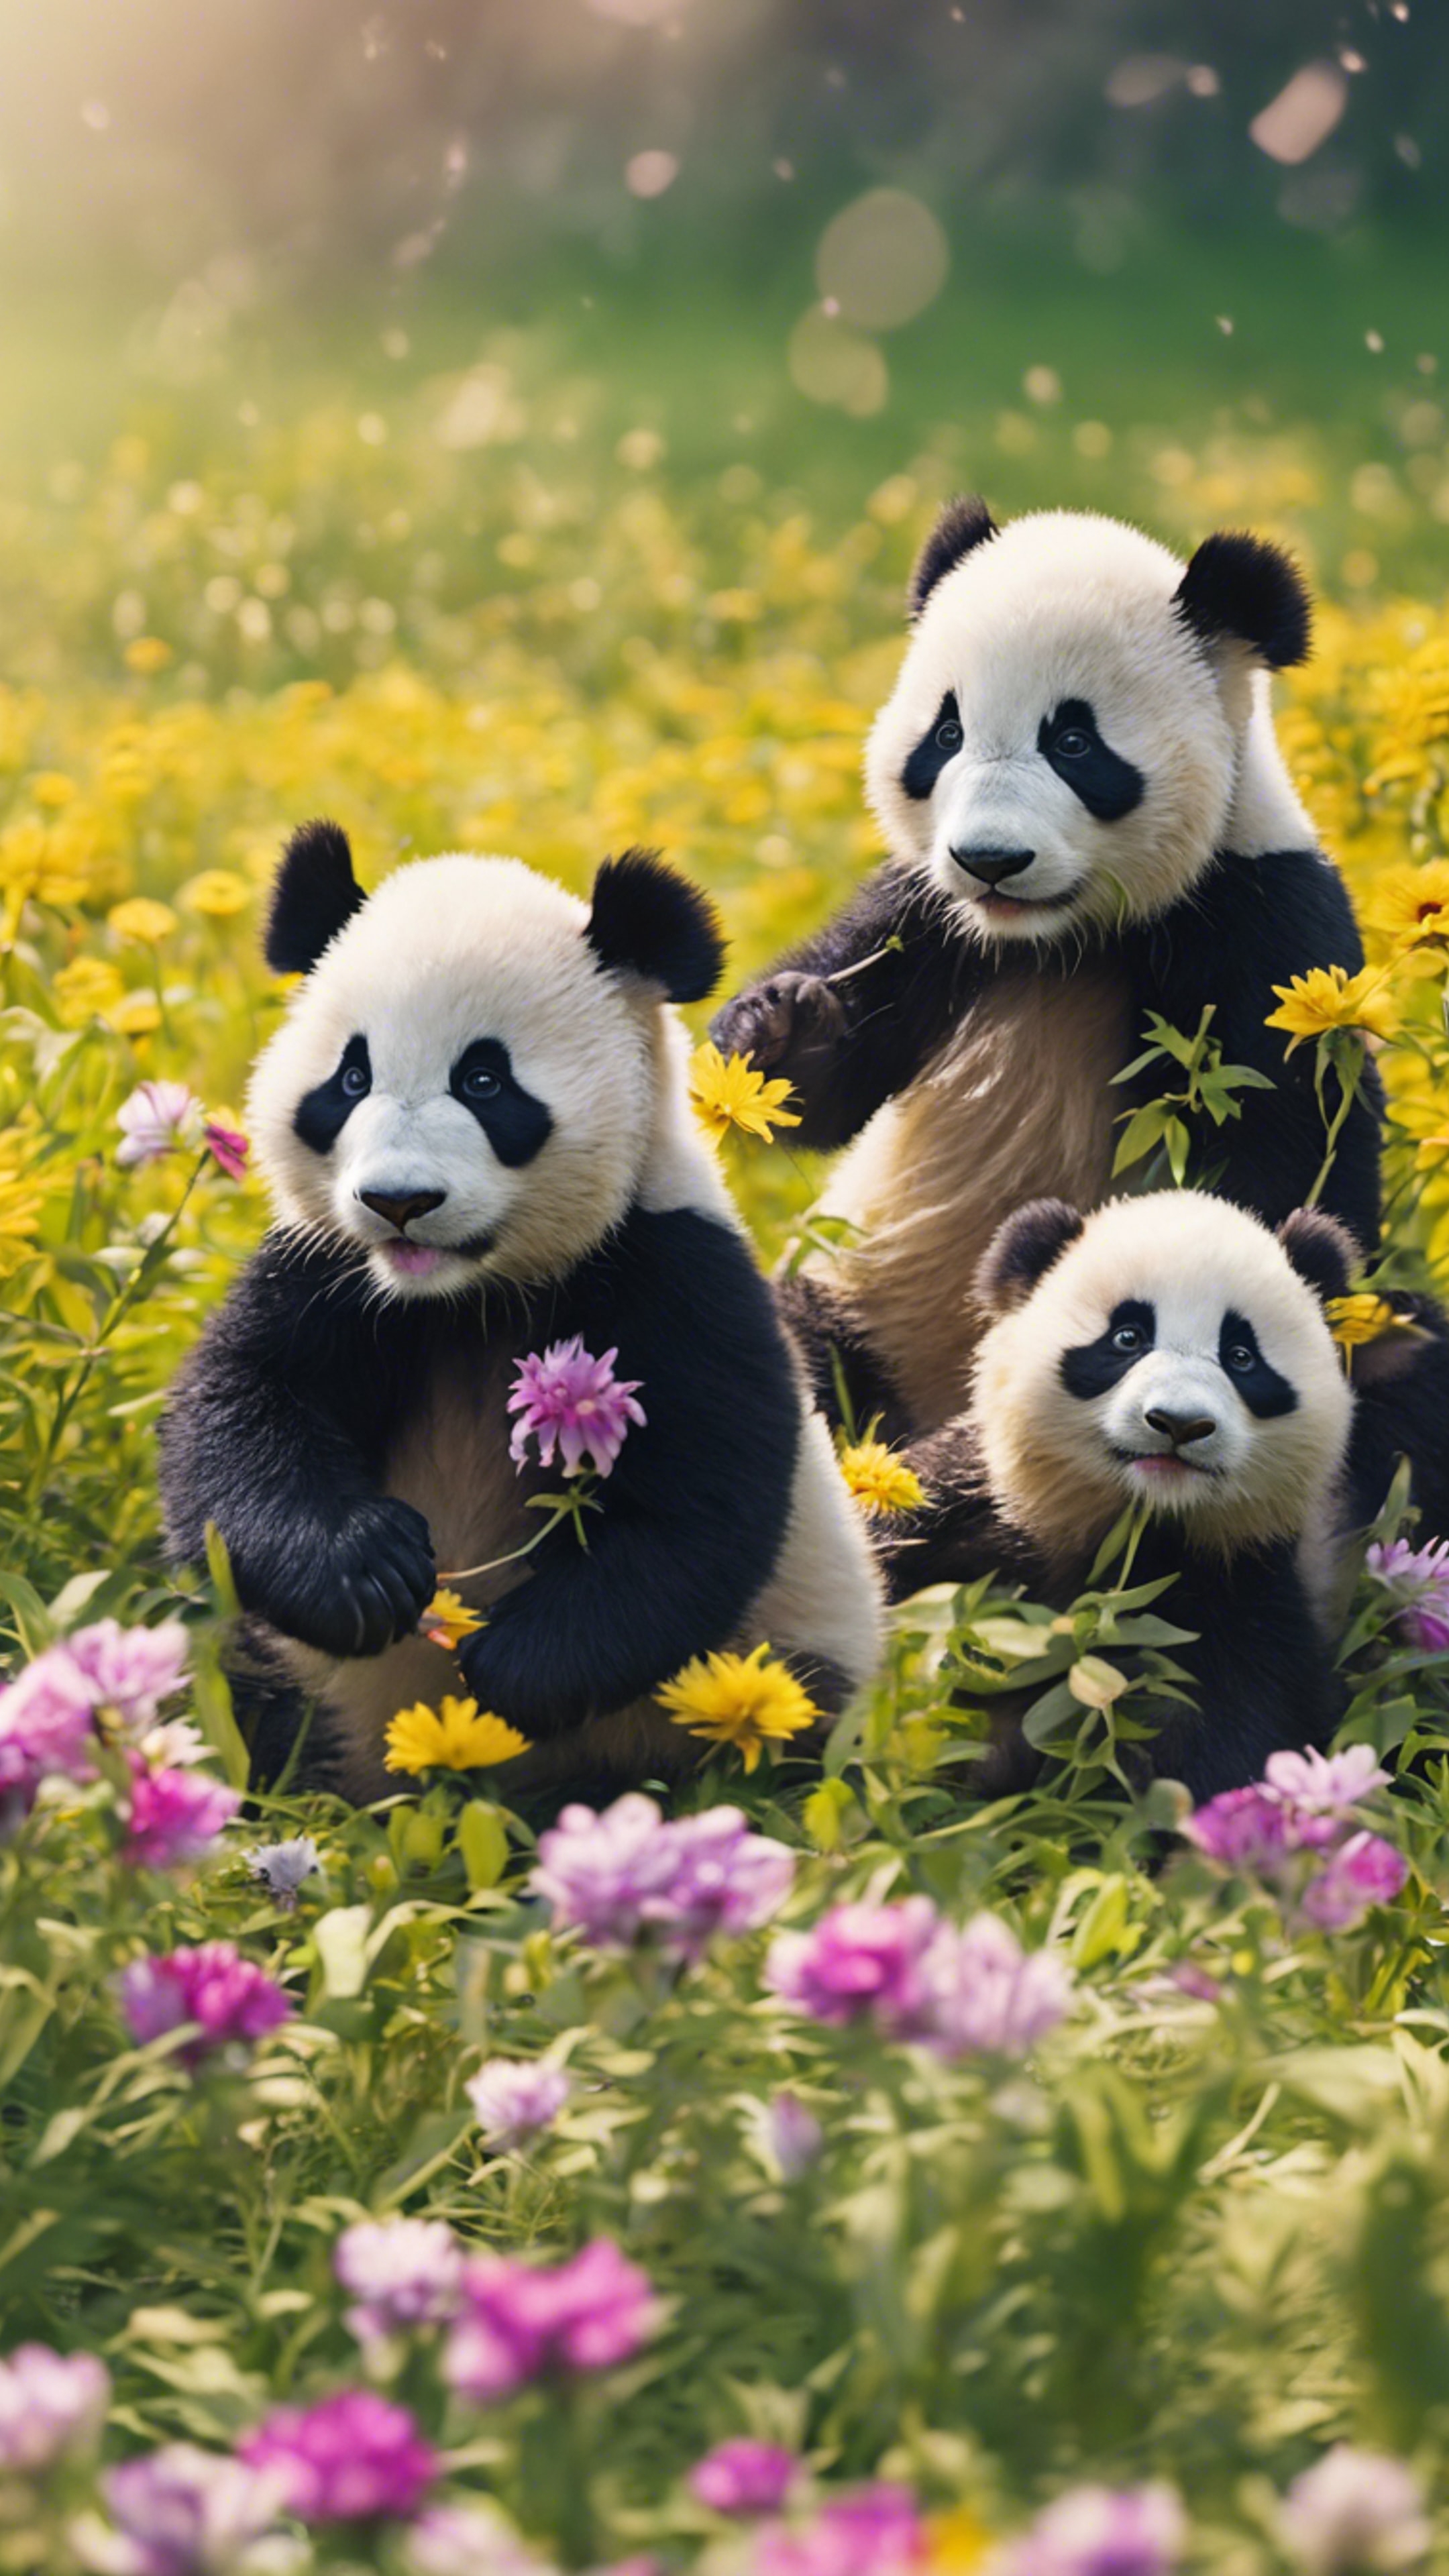 A group of lively panda cubs merrily playing tag in a field full of bright spring flowers. Шпалери[9de4fa100eef4aefa43d]